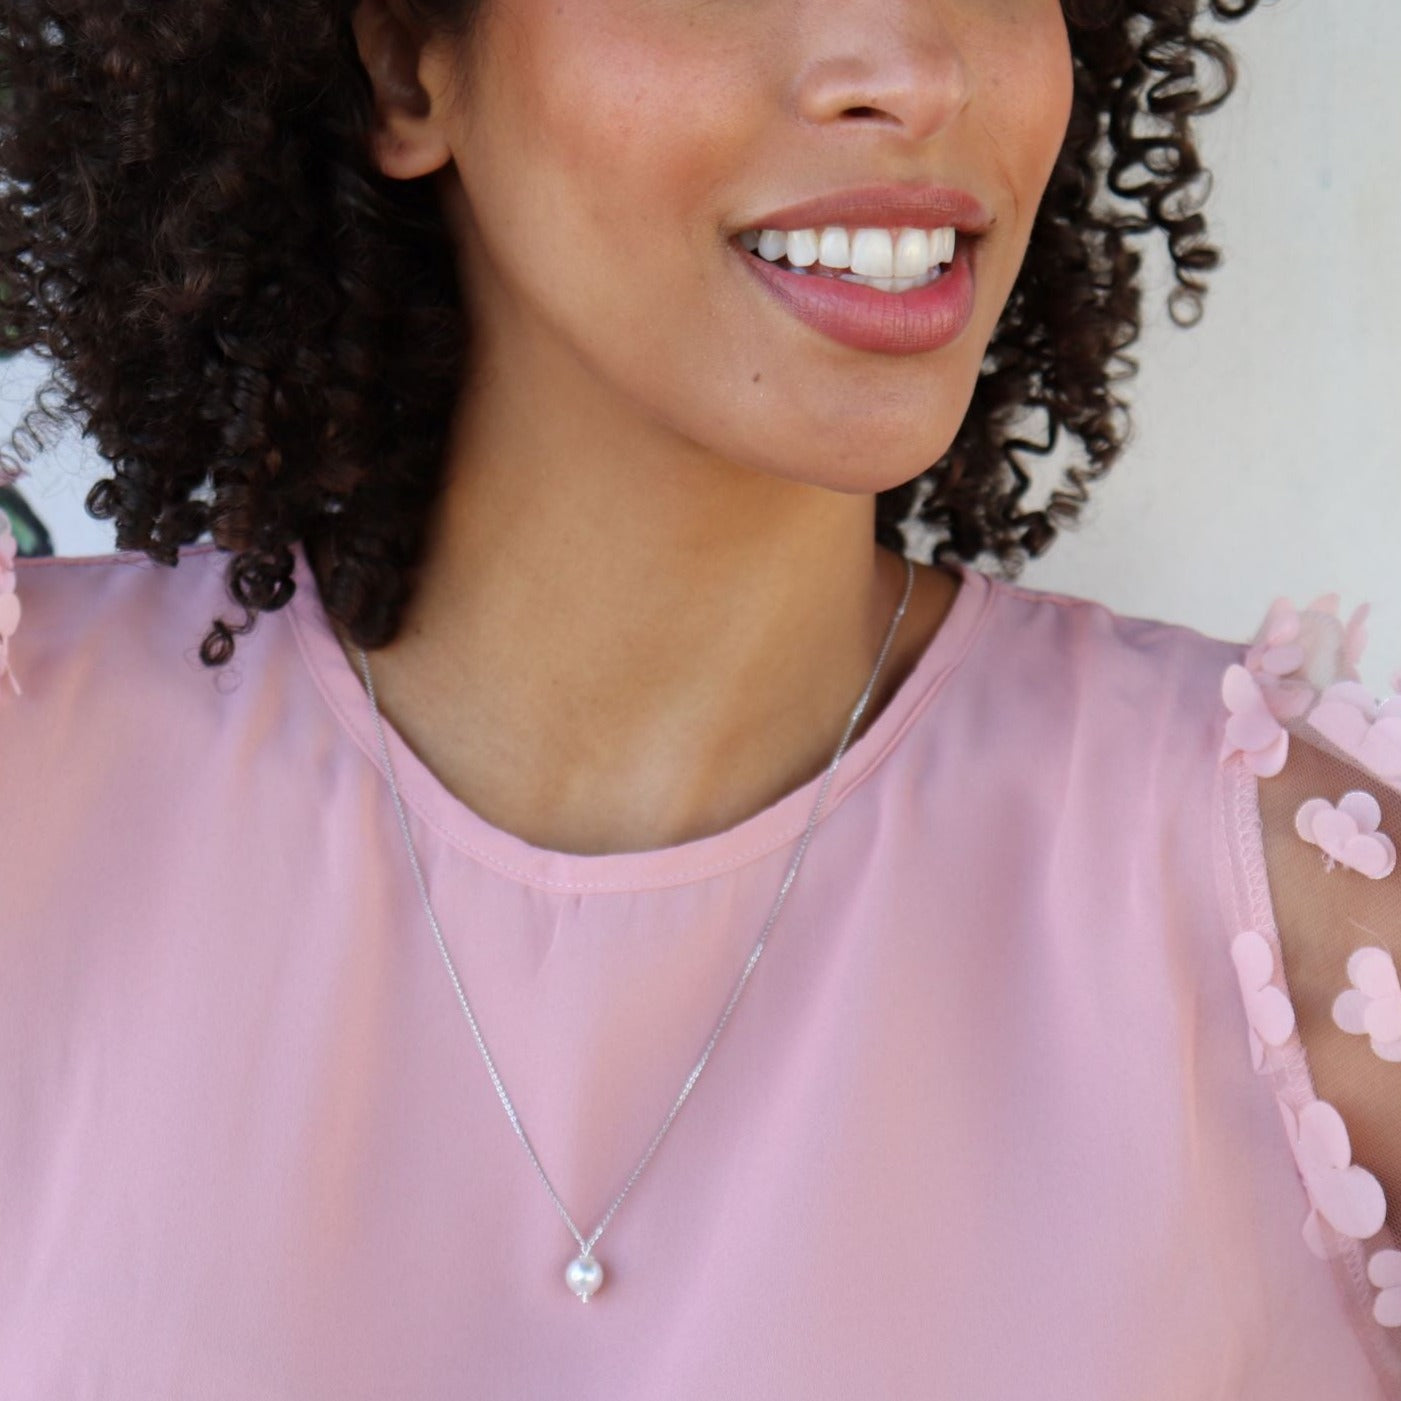 black woman with curly hair in pink dress wearing a white pearl pendant necklace